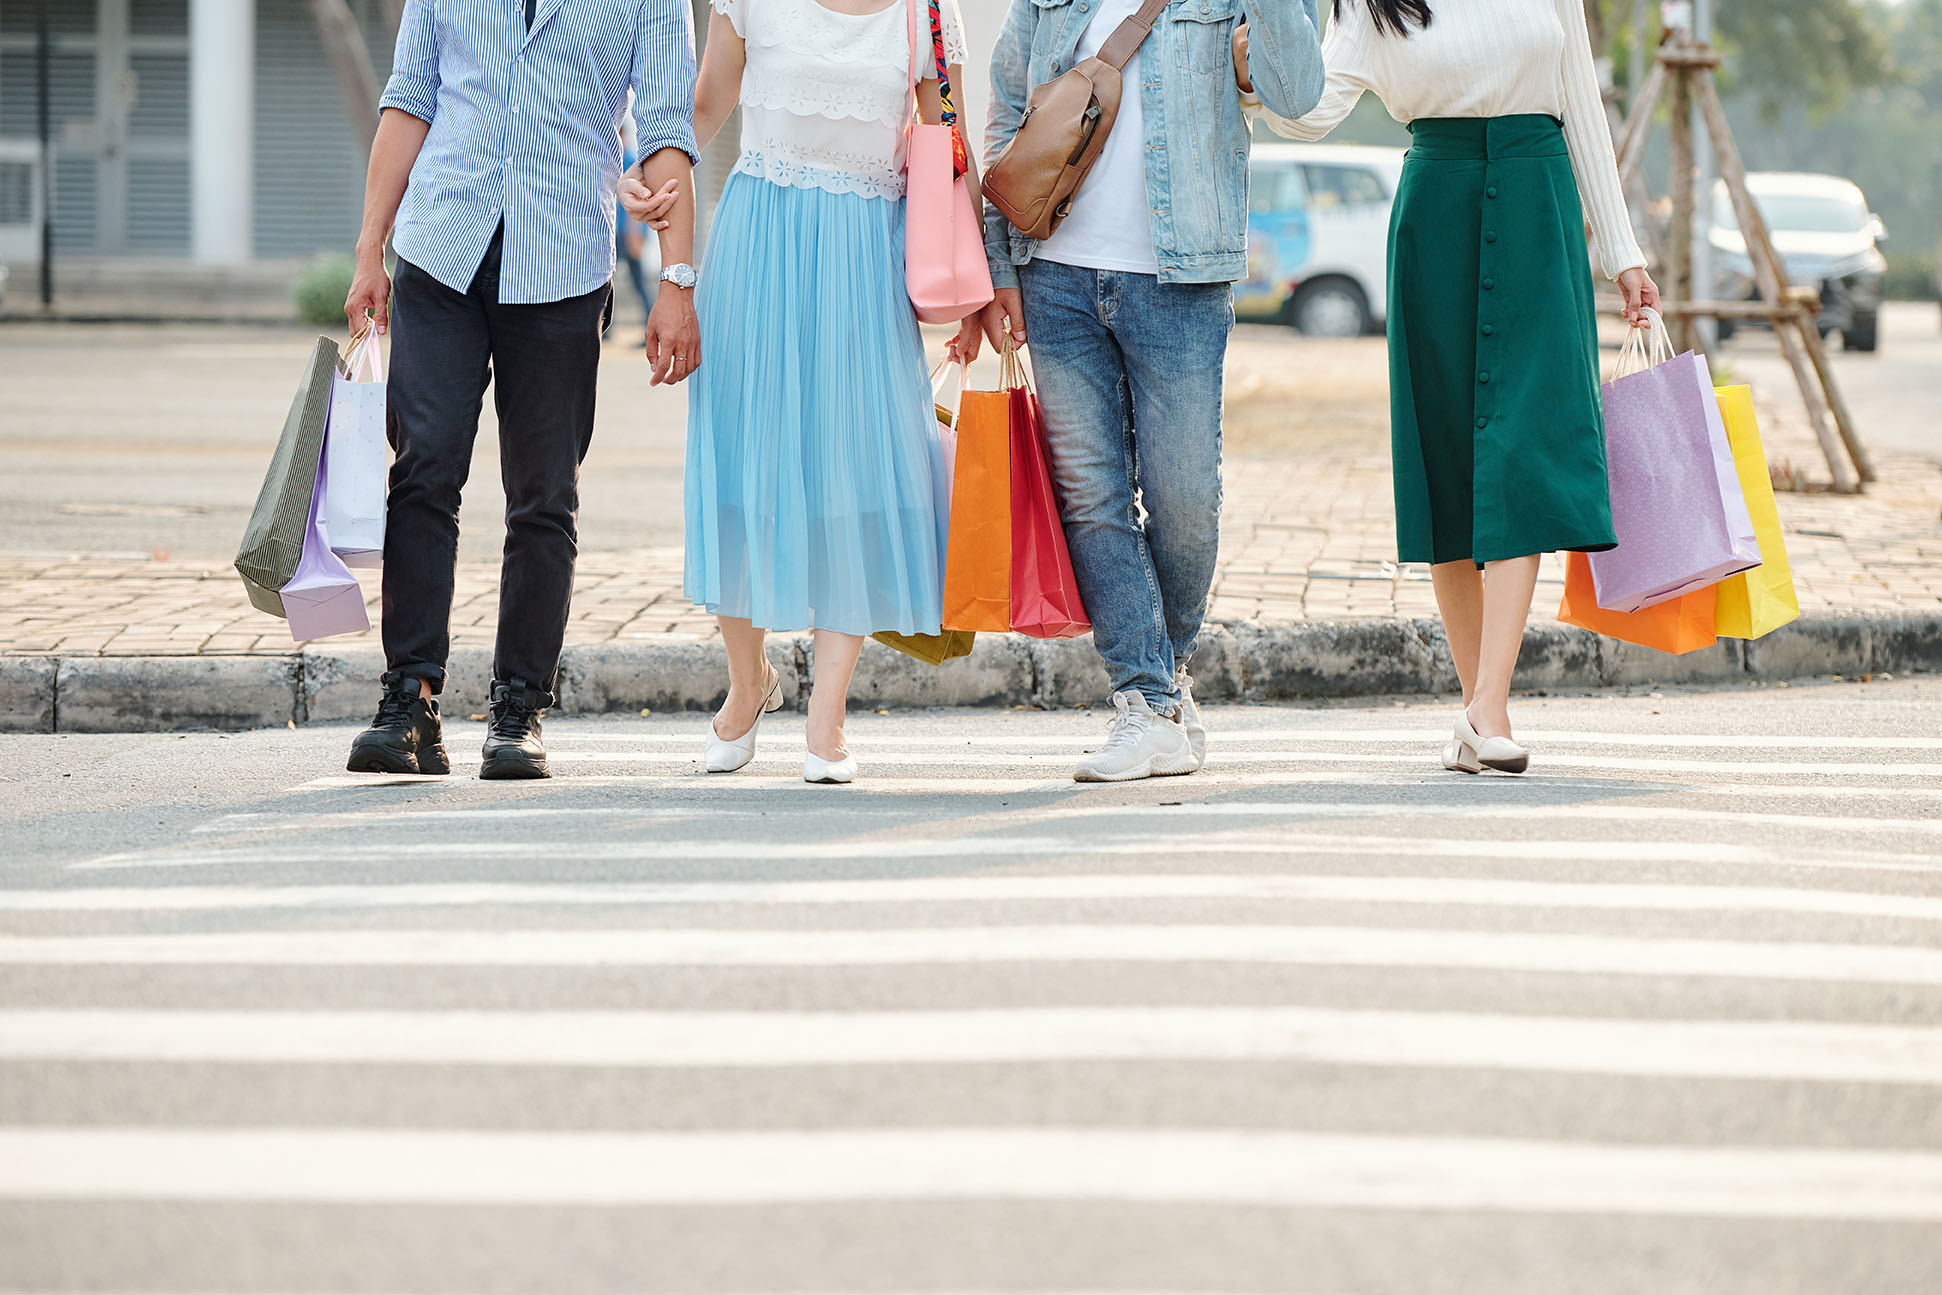 Cropped image of young people with shopping bags walking on pedestrian crosswalk